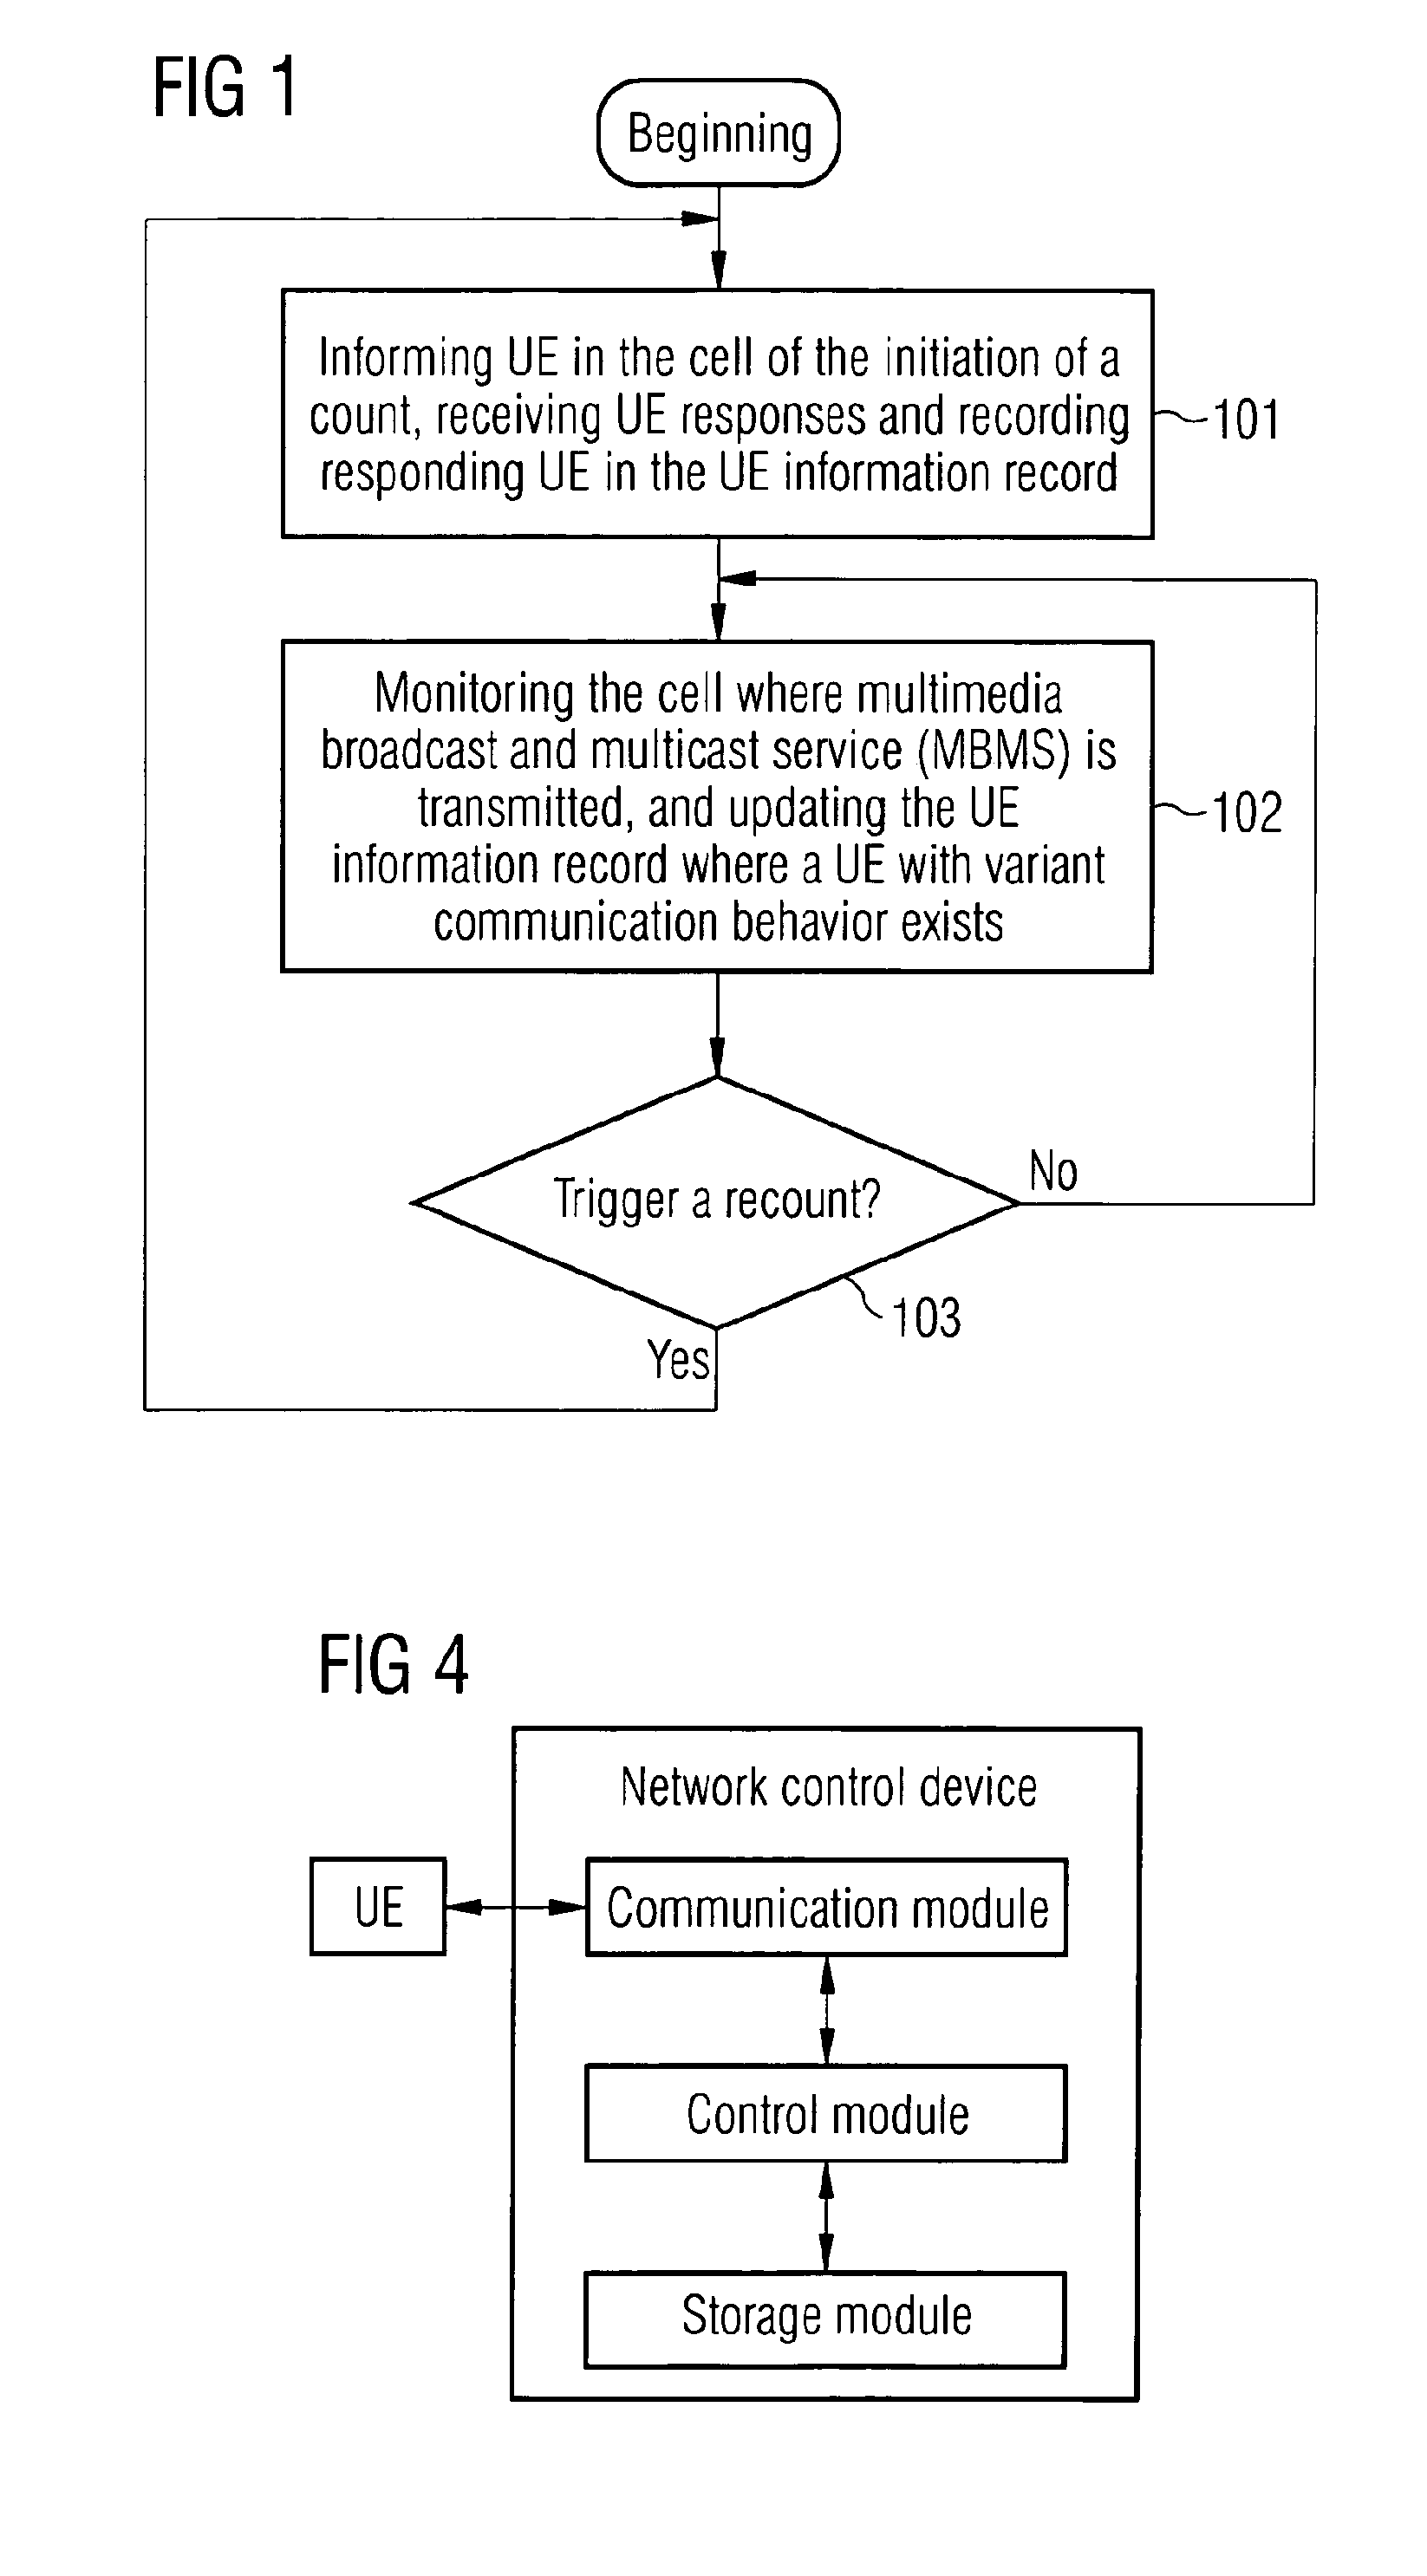 Counting method and network control device